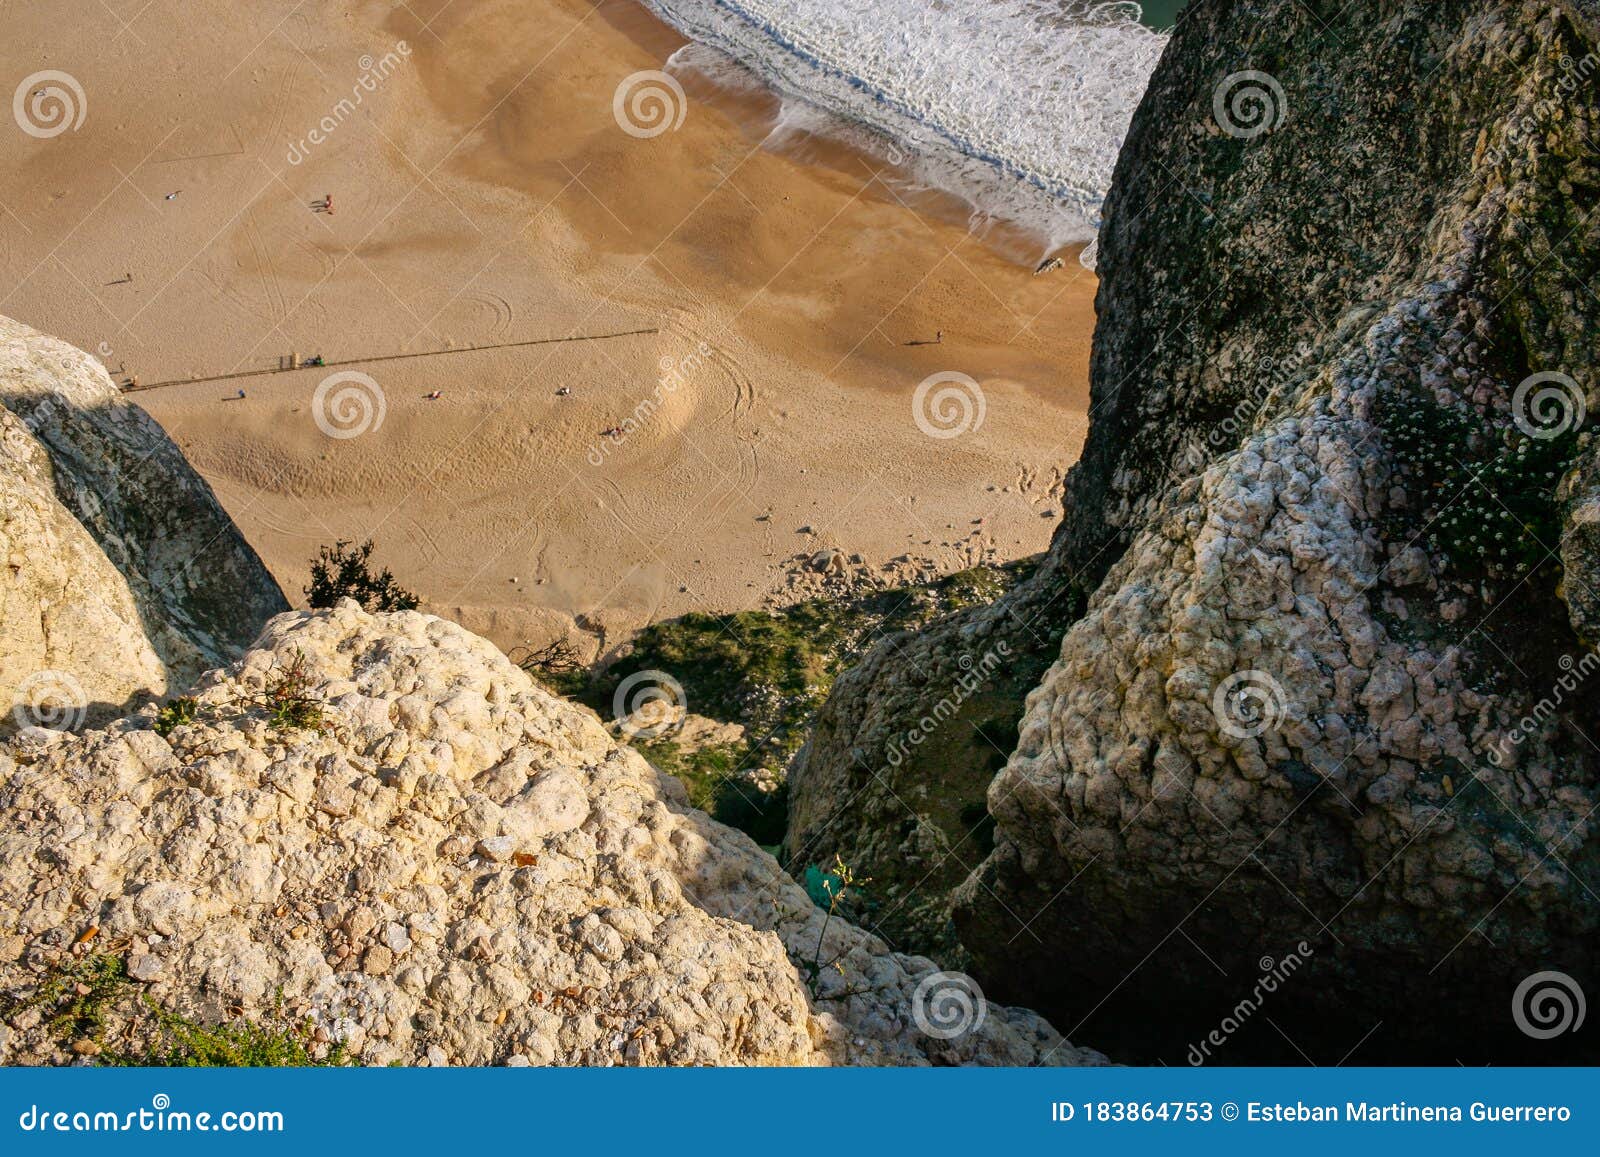 view of nazare beach from the viewpoint at the top of the cliff in o sitio